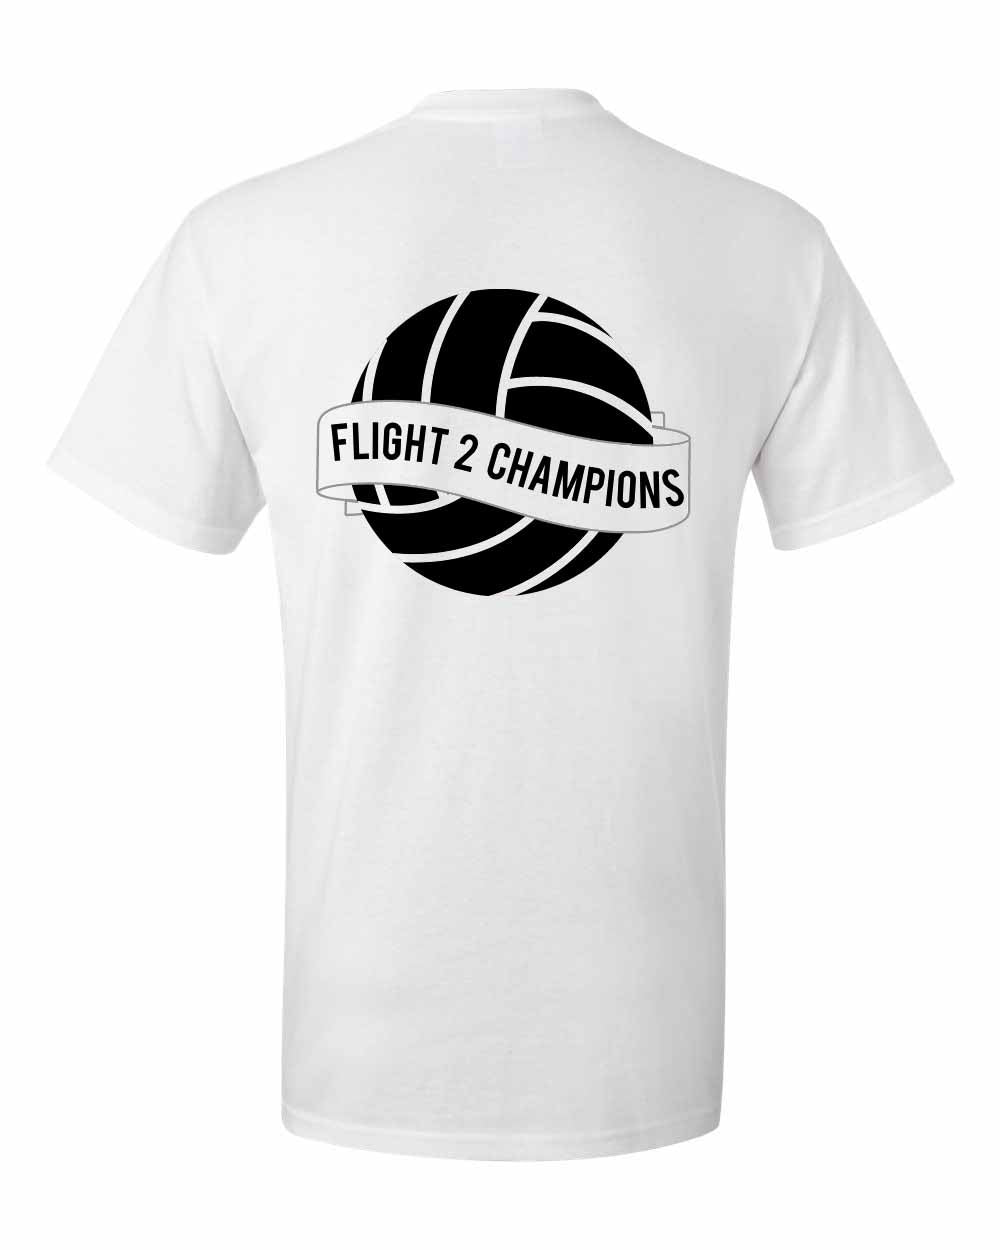 Flight 2 Champions by SHIT Volleyball Club